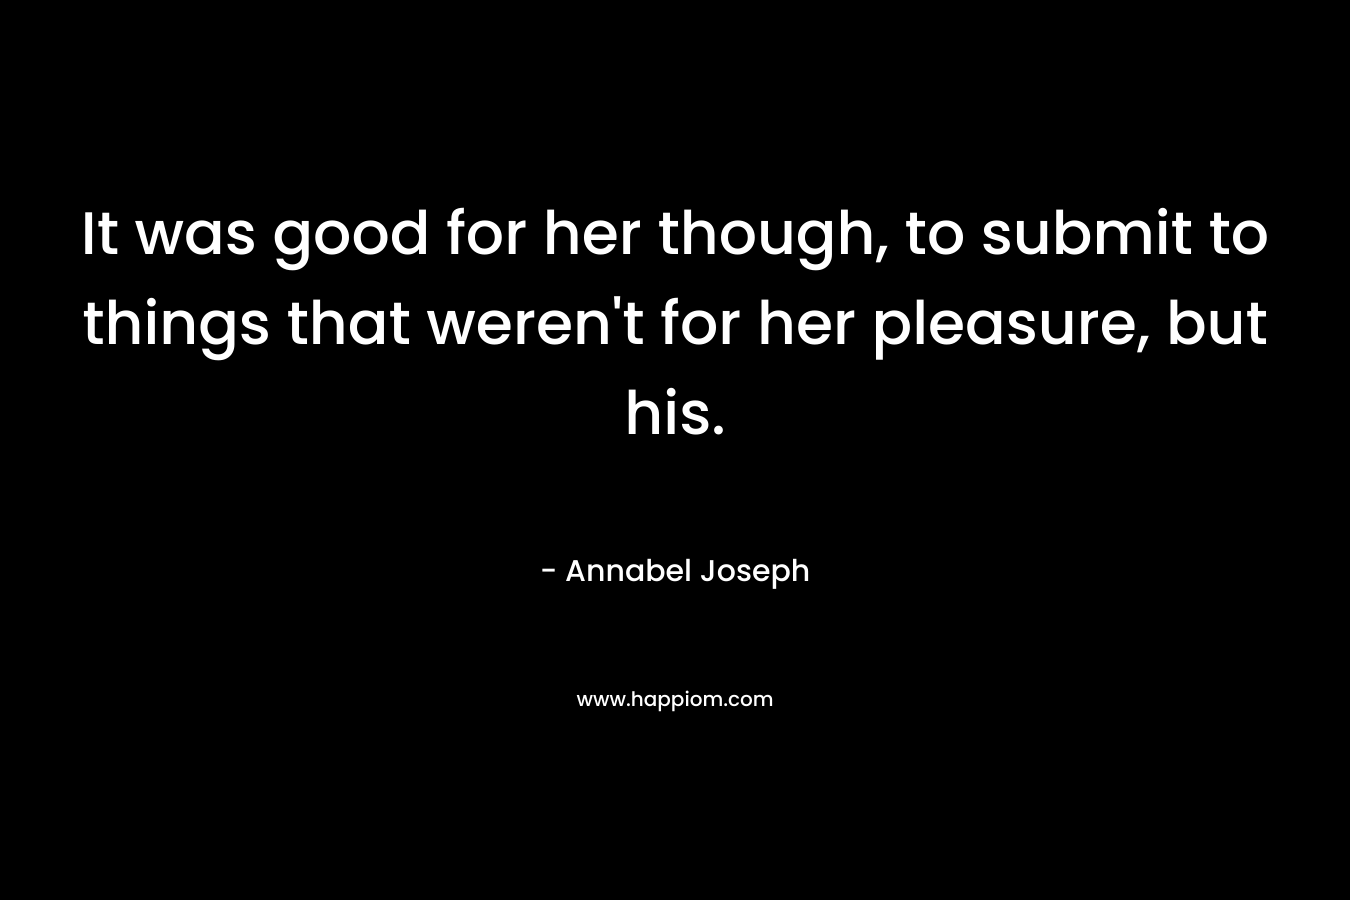 It was good for her though, to submit to things that weren’t for her pleasure, but his. – Annabel Joseph